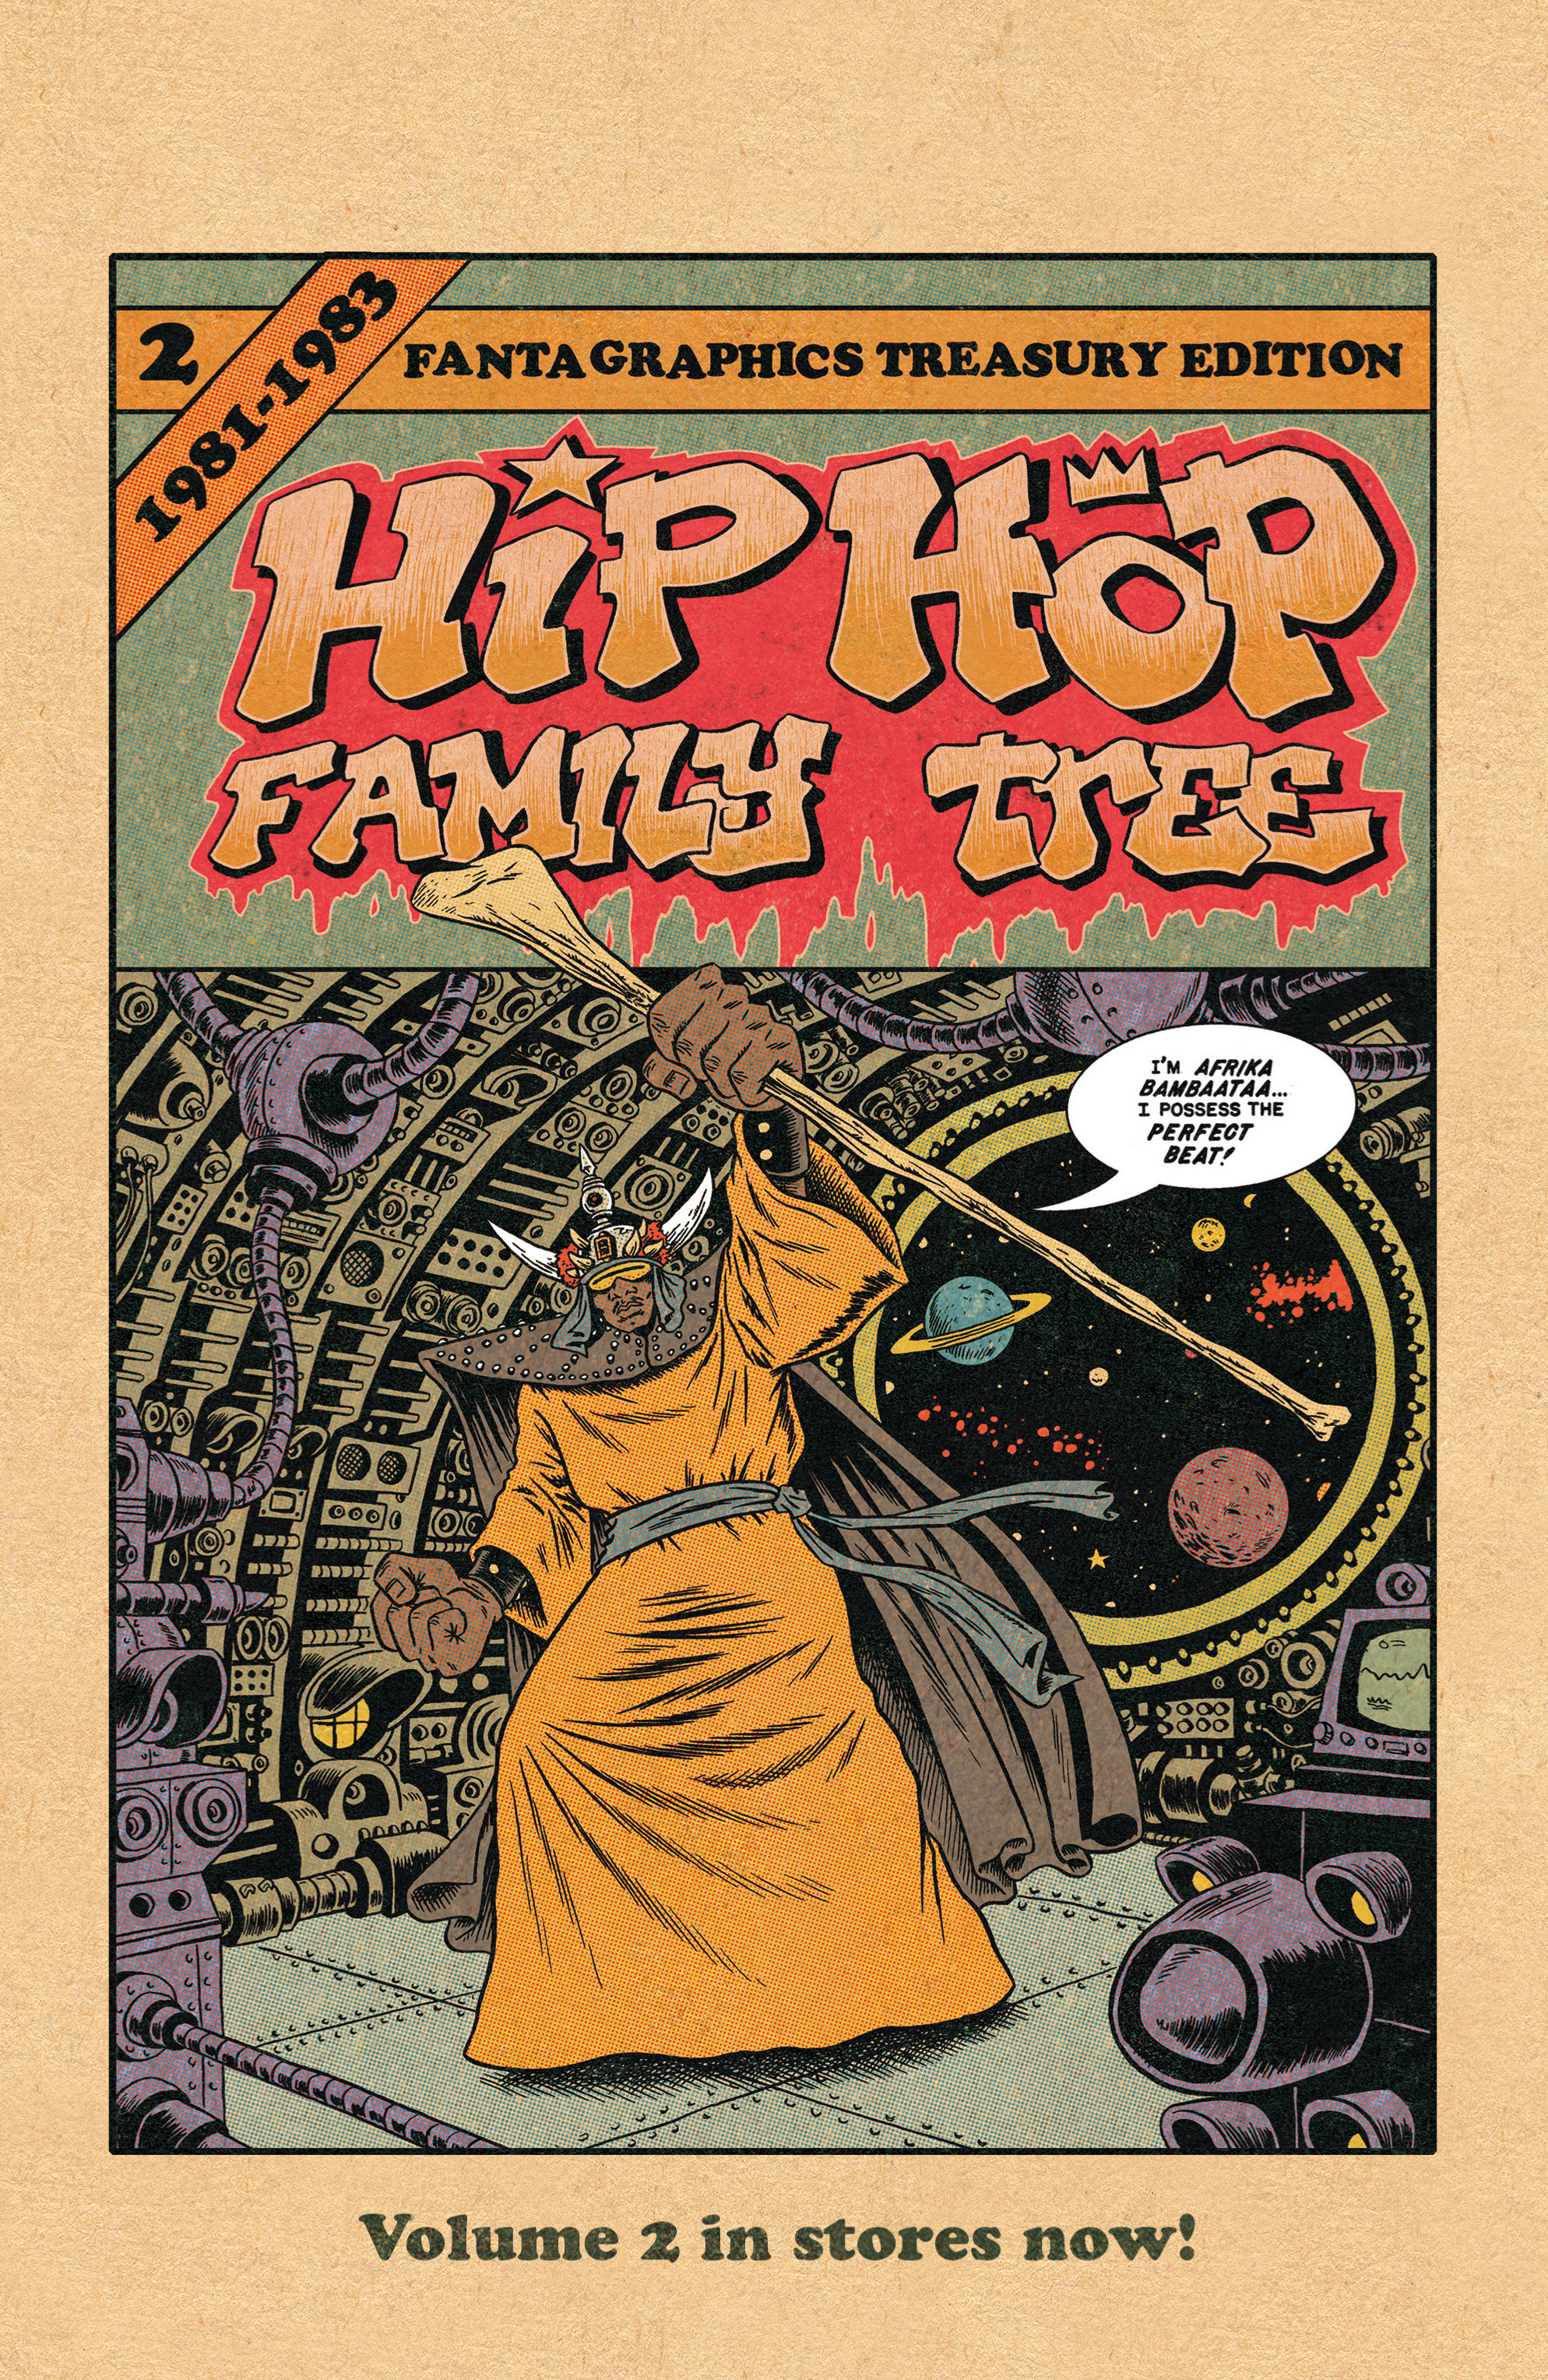 Read online Free Comic Book Day 2015 comic -  Issue # Hip Hop Family Tree Three-in-One - Featuring Cosplayers - 9